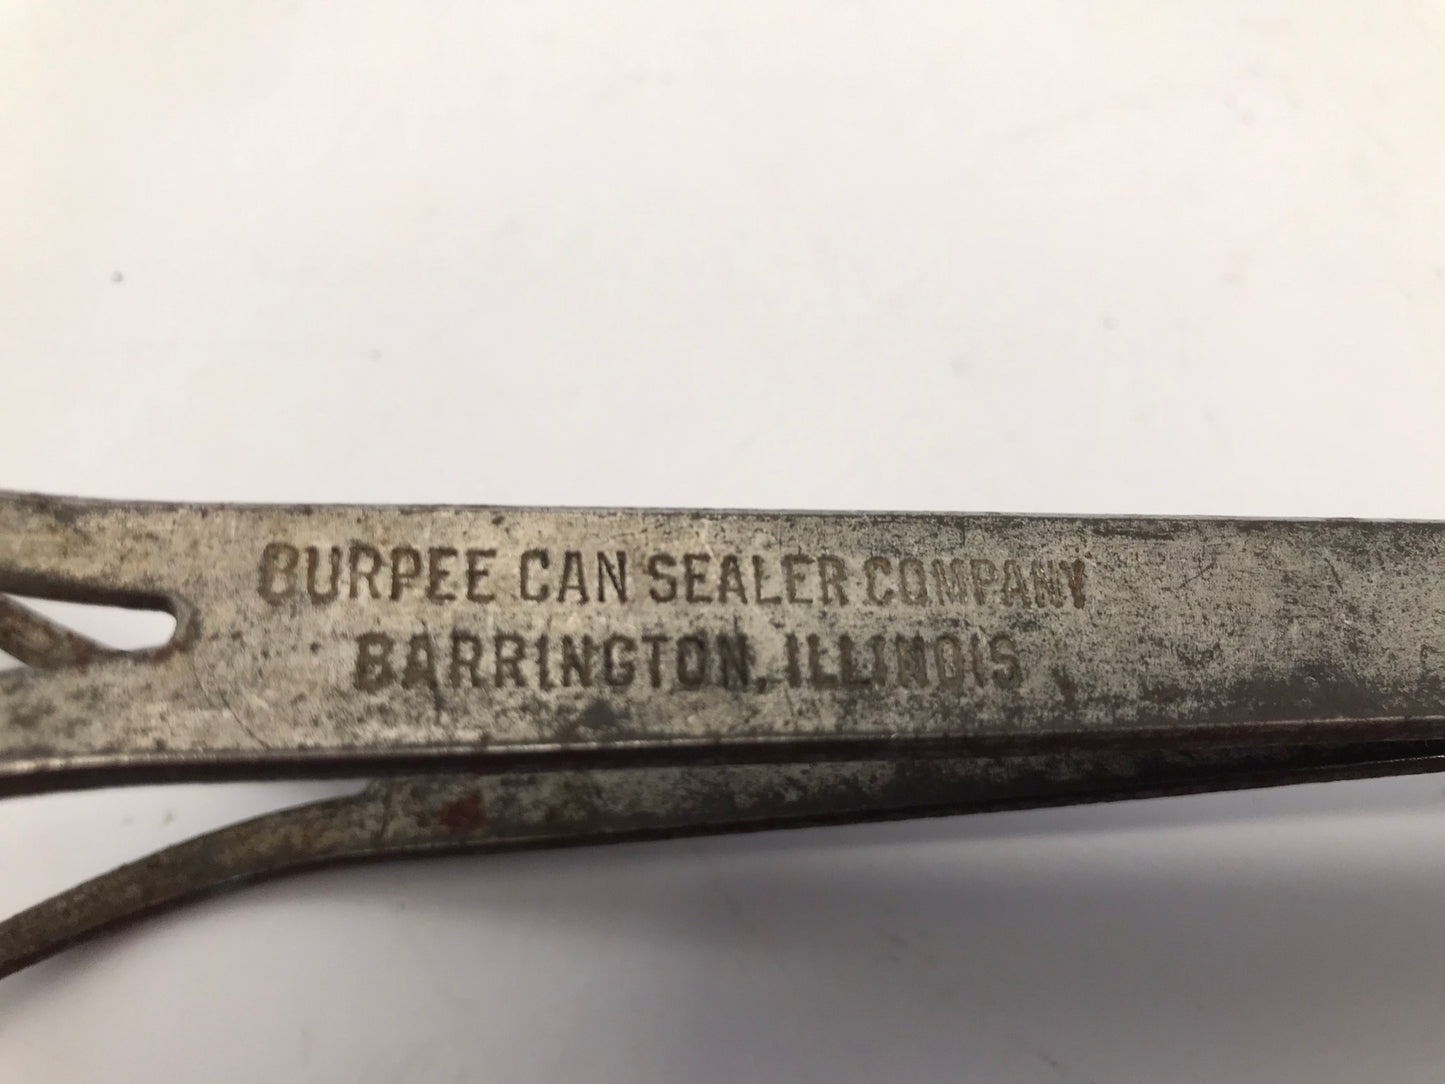 Antique Canning Burpee Jar Lifter Burpee Can Sealer Company USA Rare 13 inch Tall